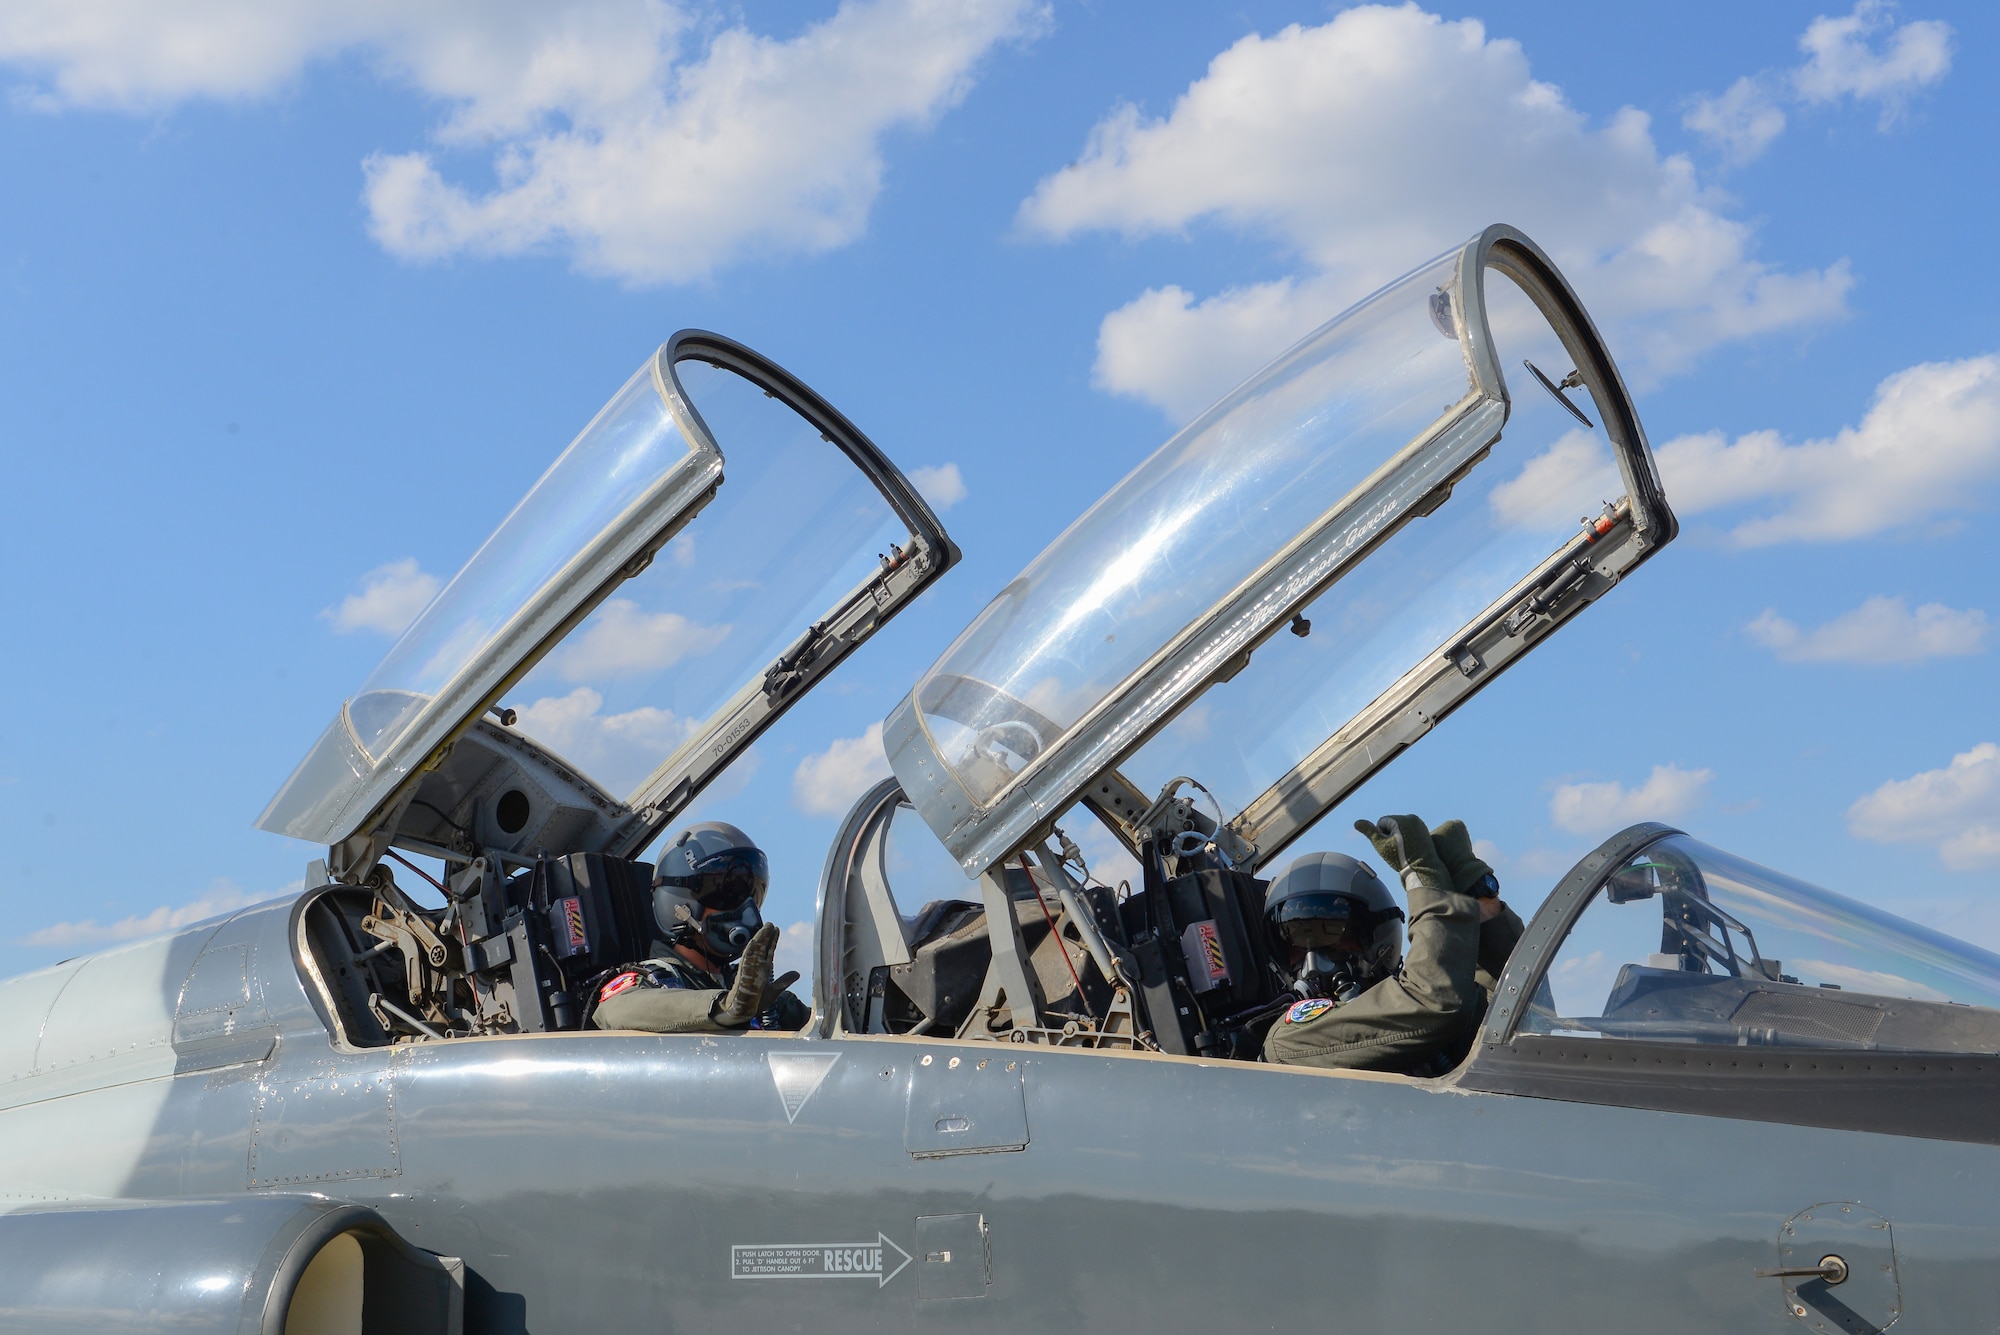 Second Lieutenant Colin Asbury, 47th Flying Training Wing pilot graduate, signals to pull chocks before one of his final training flights at Laughlin Air Force Base, Texas, May 15, 2018. After 52 weeks of Specialized Undergraduate Pilot Training, Asbury moves on to fly his aircraft of choice the F-15E Strike Eagle. The wings Asbury received upon graduation first entered service in 1941, and makes him the third carrier of this particular pair. (U.S. Air Force photo by Senior Airman Benjamin N. Valmoja)